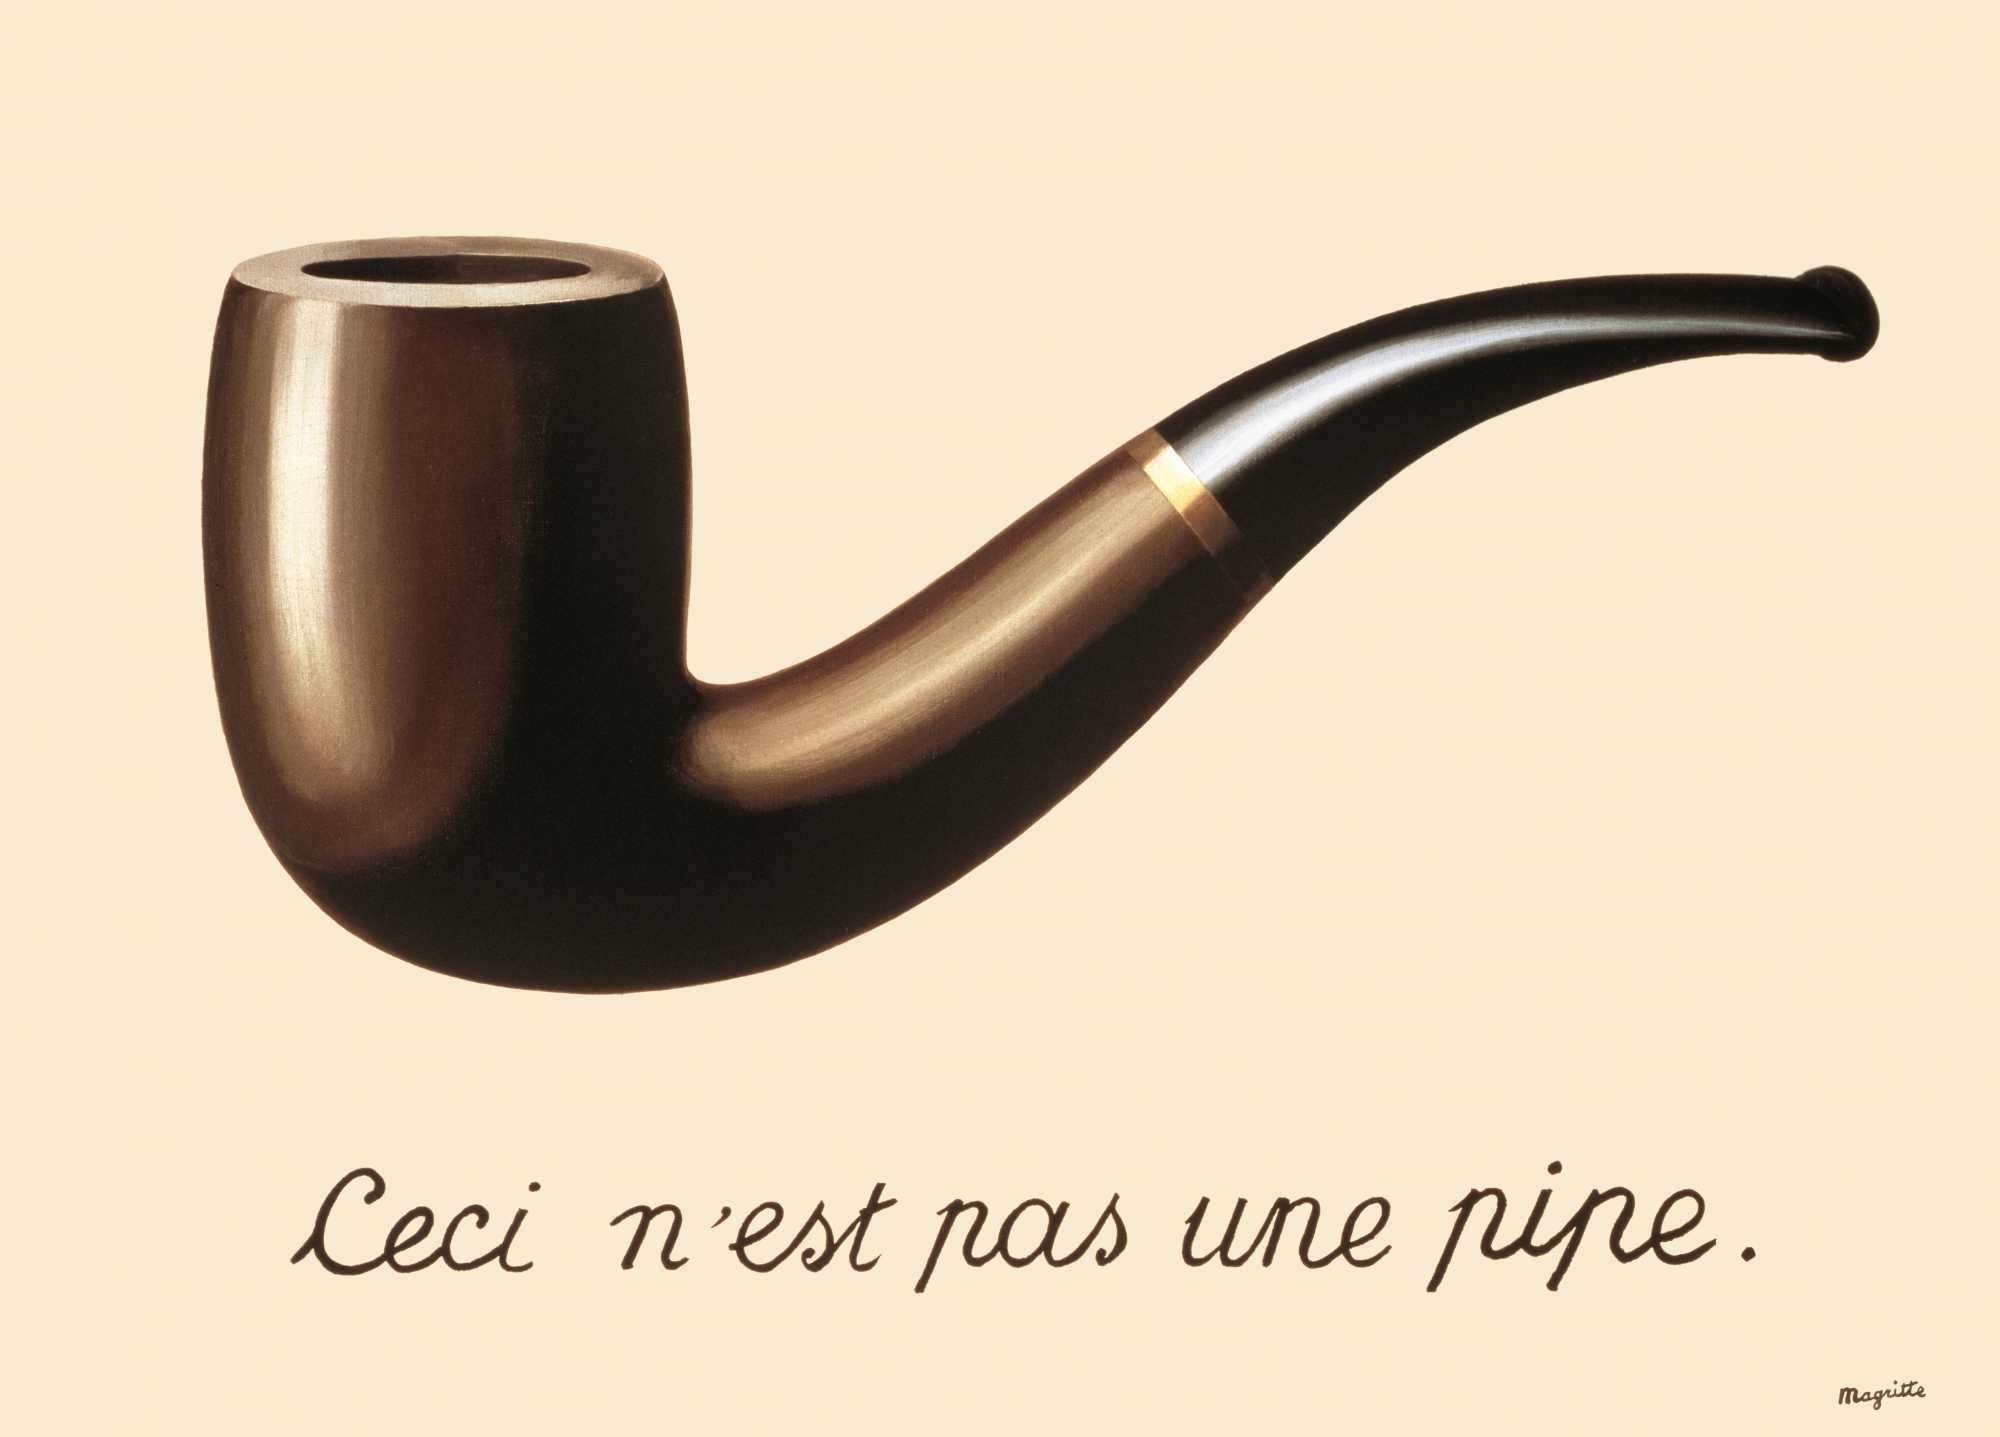 René Magritte, The Treachery of Images (This is Not a Pipe), 1929, Los Angeles County Museum of Art (LACMA),